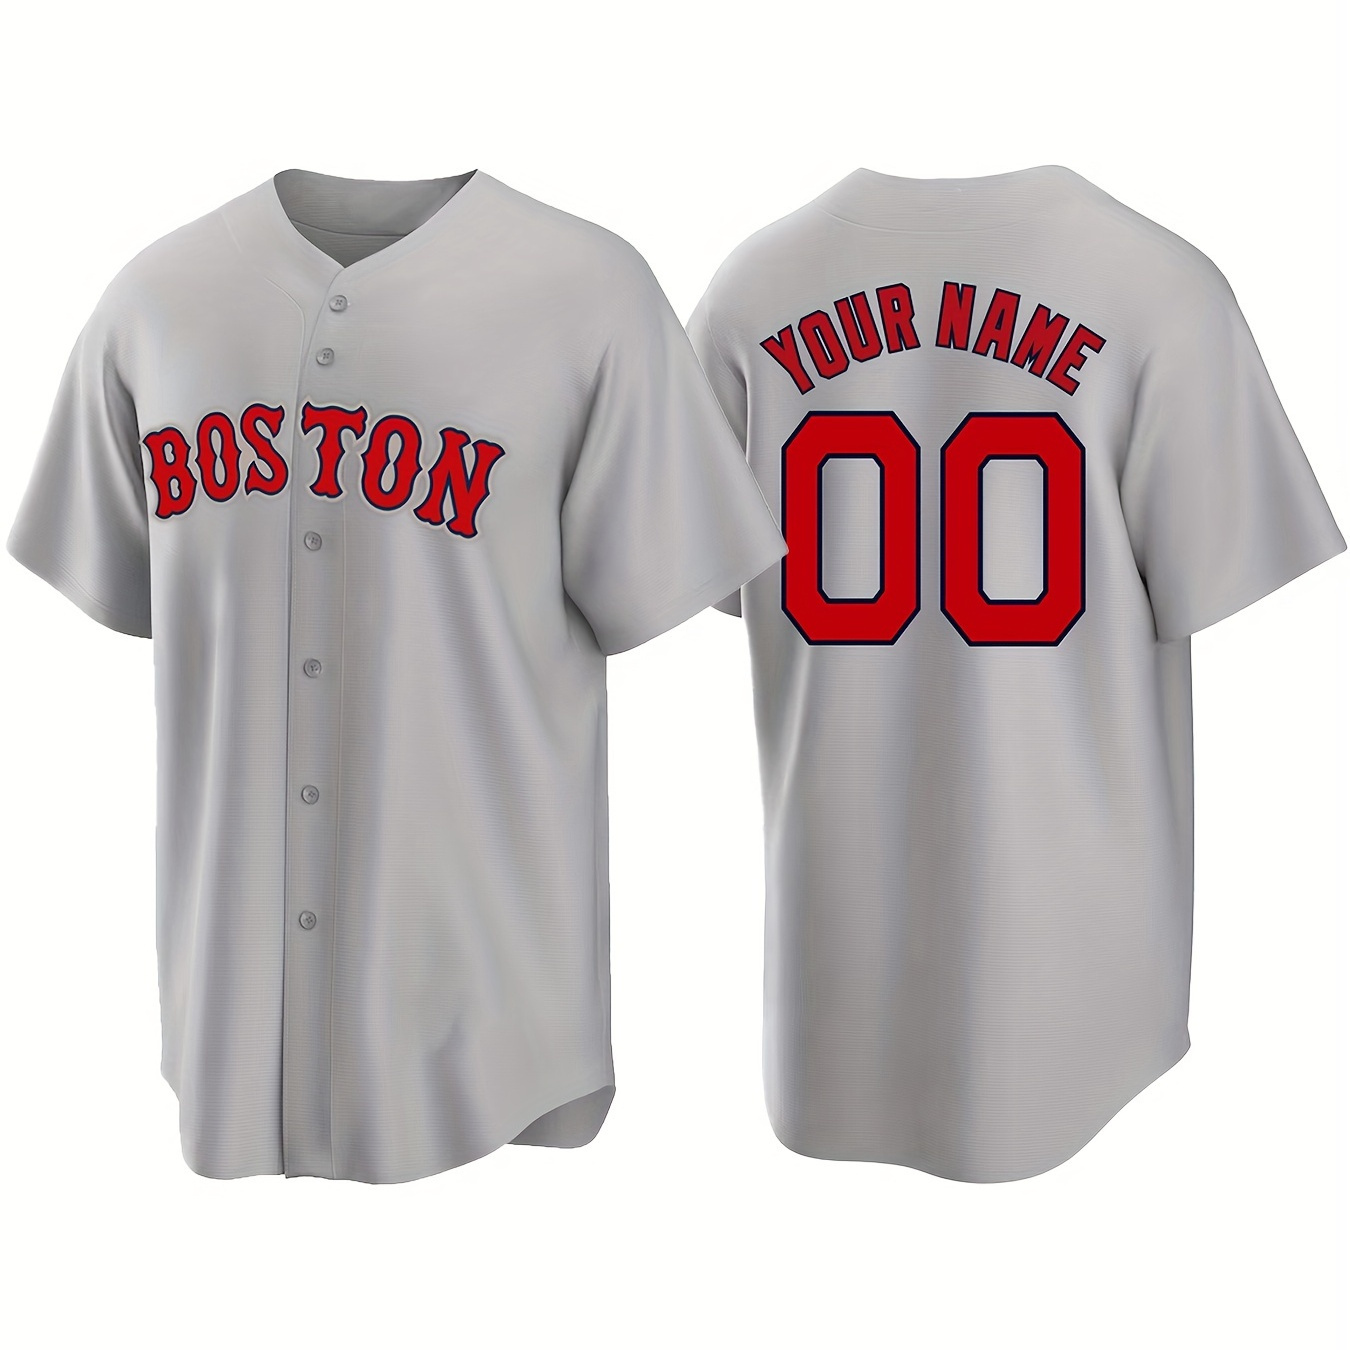 

Customizable Name And Number Men's Baseball Jersey With Embroidered Boston Letters Pattern, Leisure Outdoor Sports Customized S-3xl